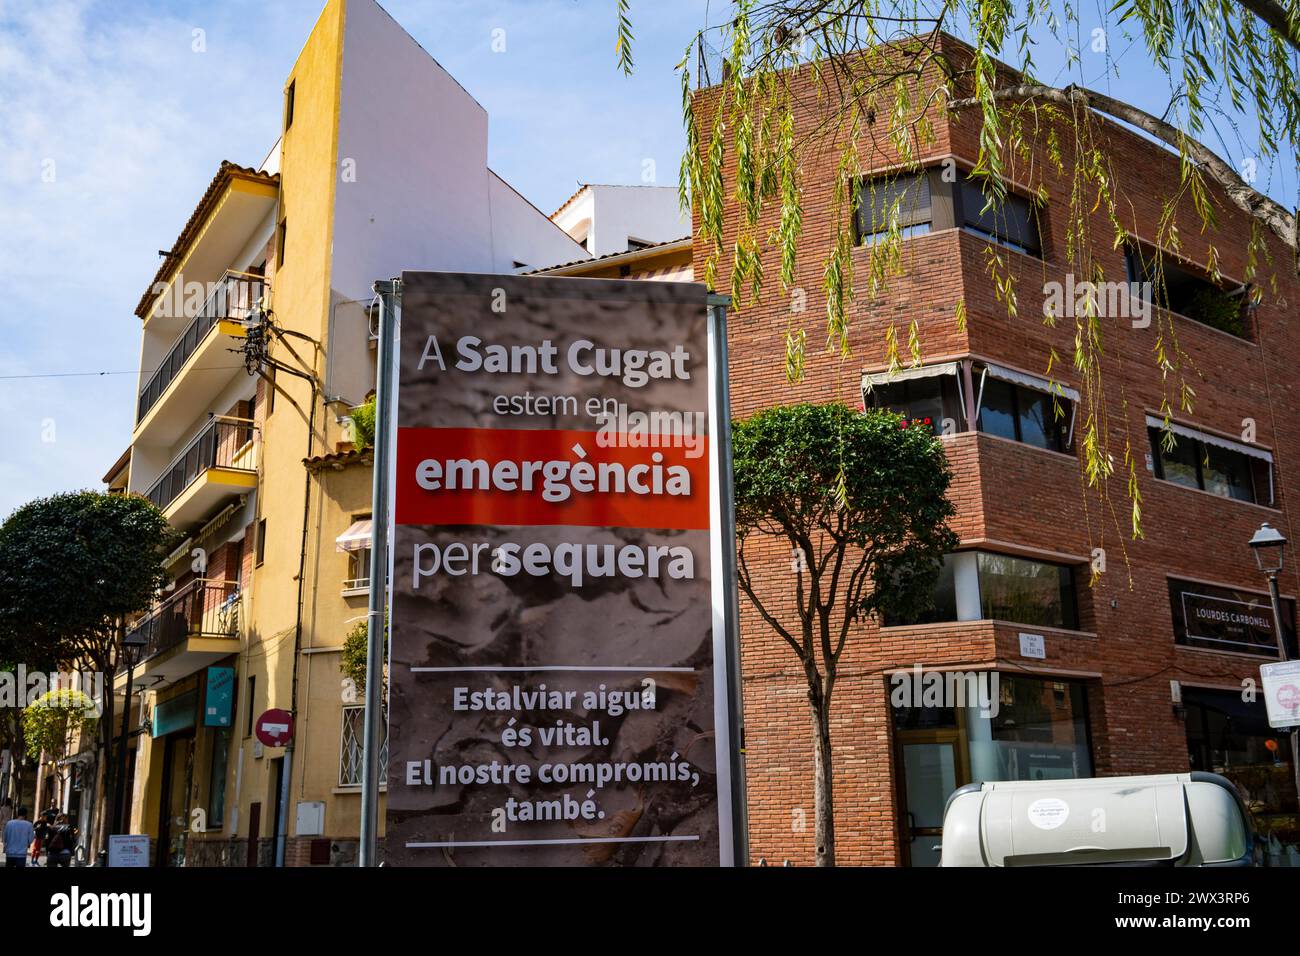 Sign in Sant Cugat del Valles, Catalonia, warning about the emergency regarding water shortages due to an ongoing drough - and lack of rain. Stock Photo